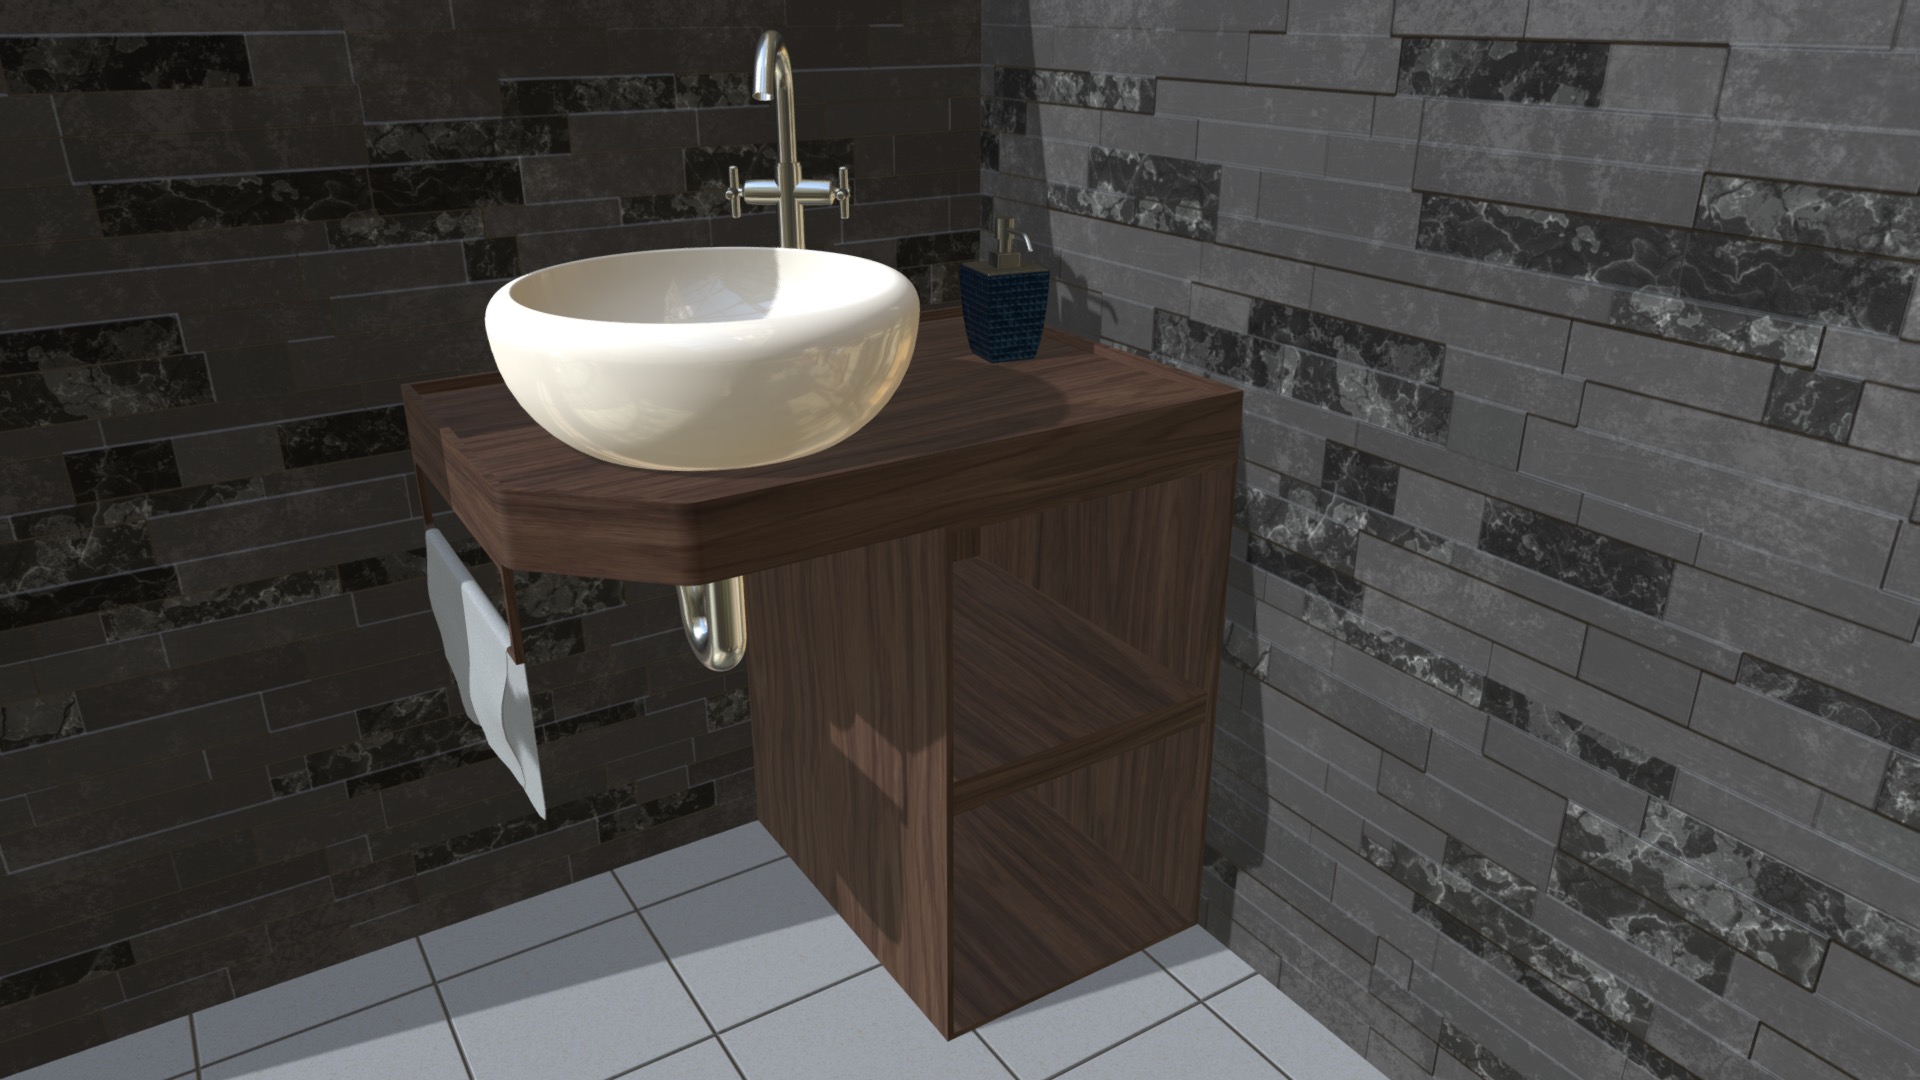 3D model Ethnic Sink Cabinet - This is a 3D model of the Ethnic Sink Cabinet. The 3D model is about a sink in a bathroom.